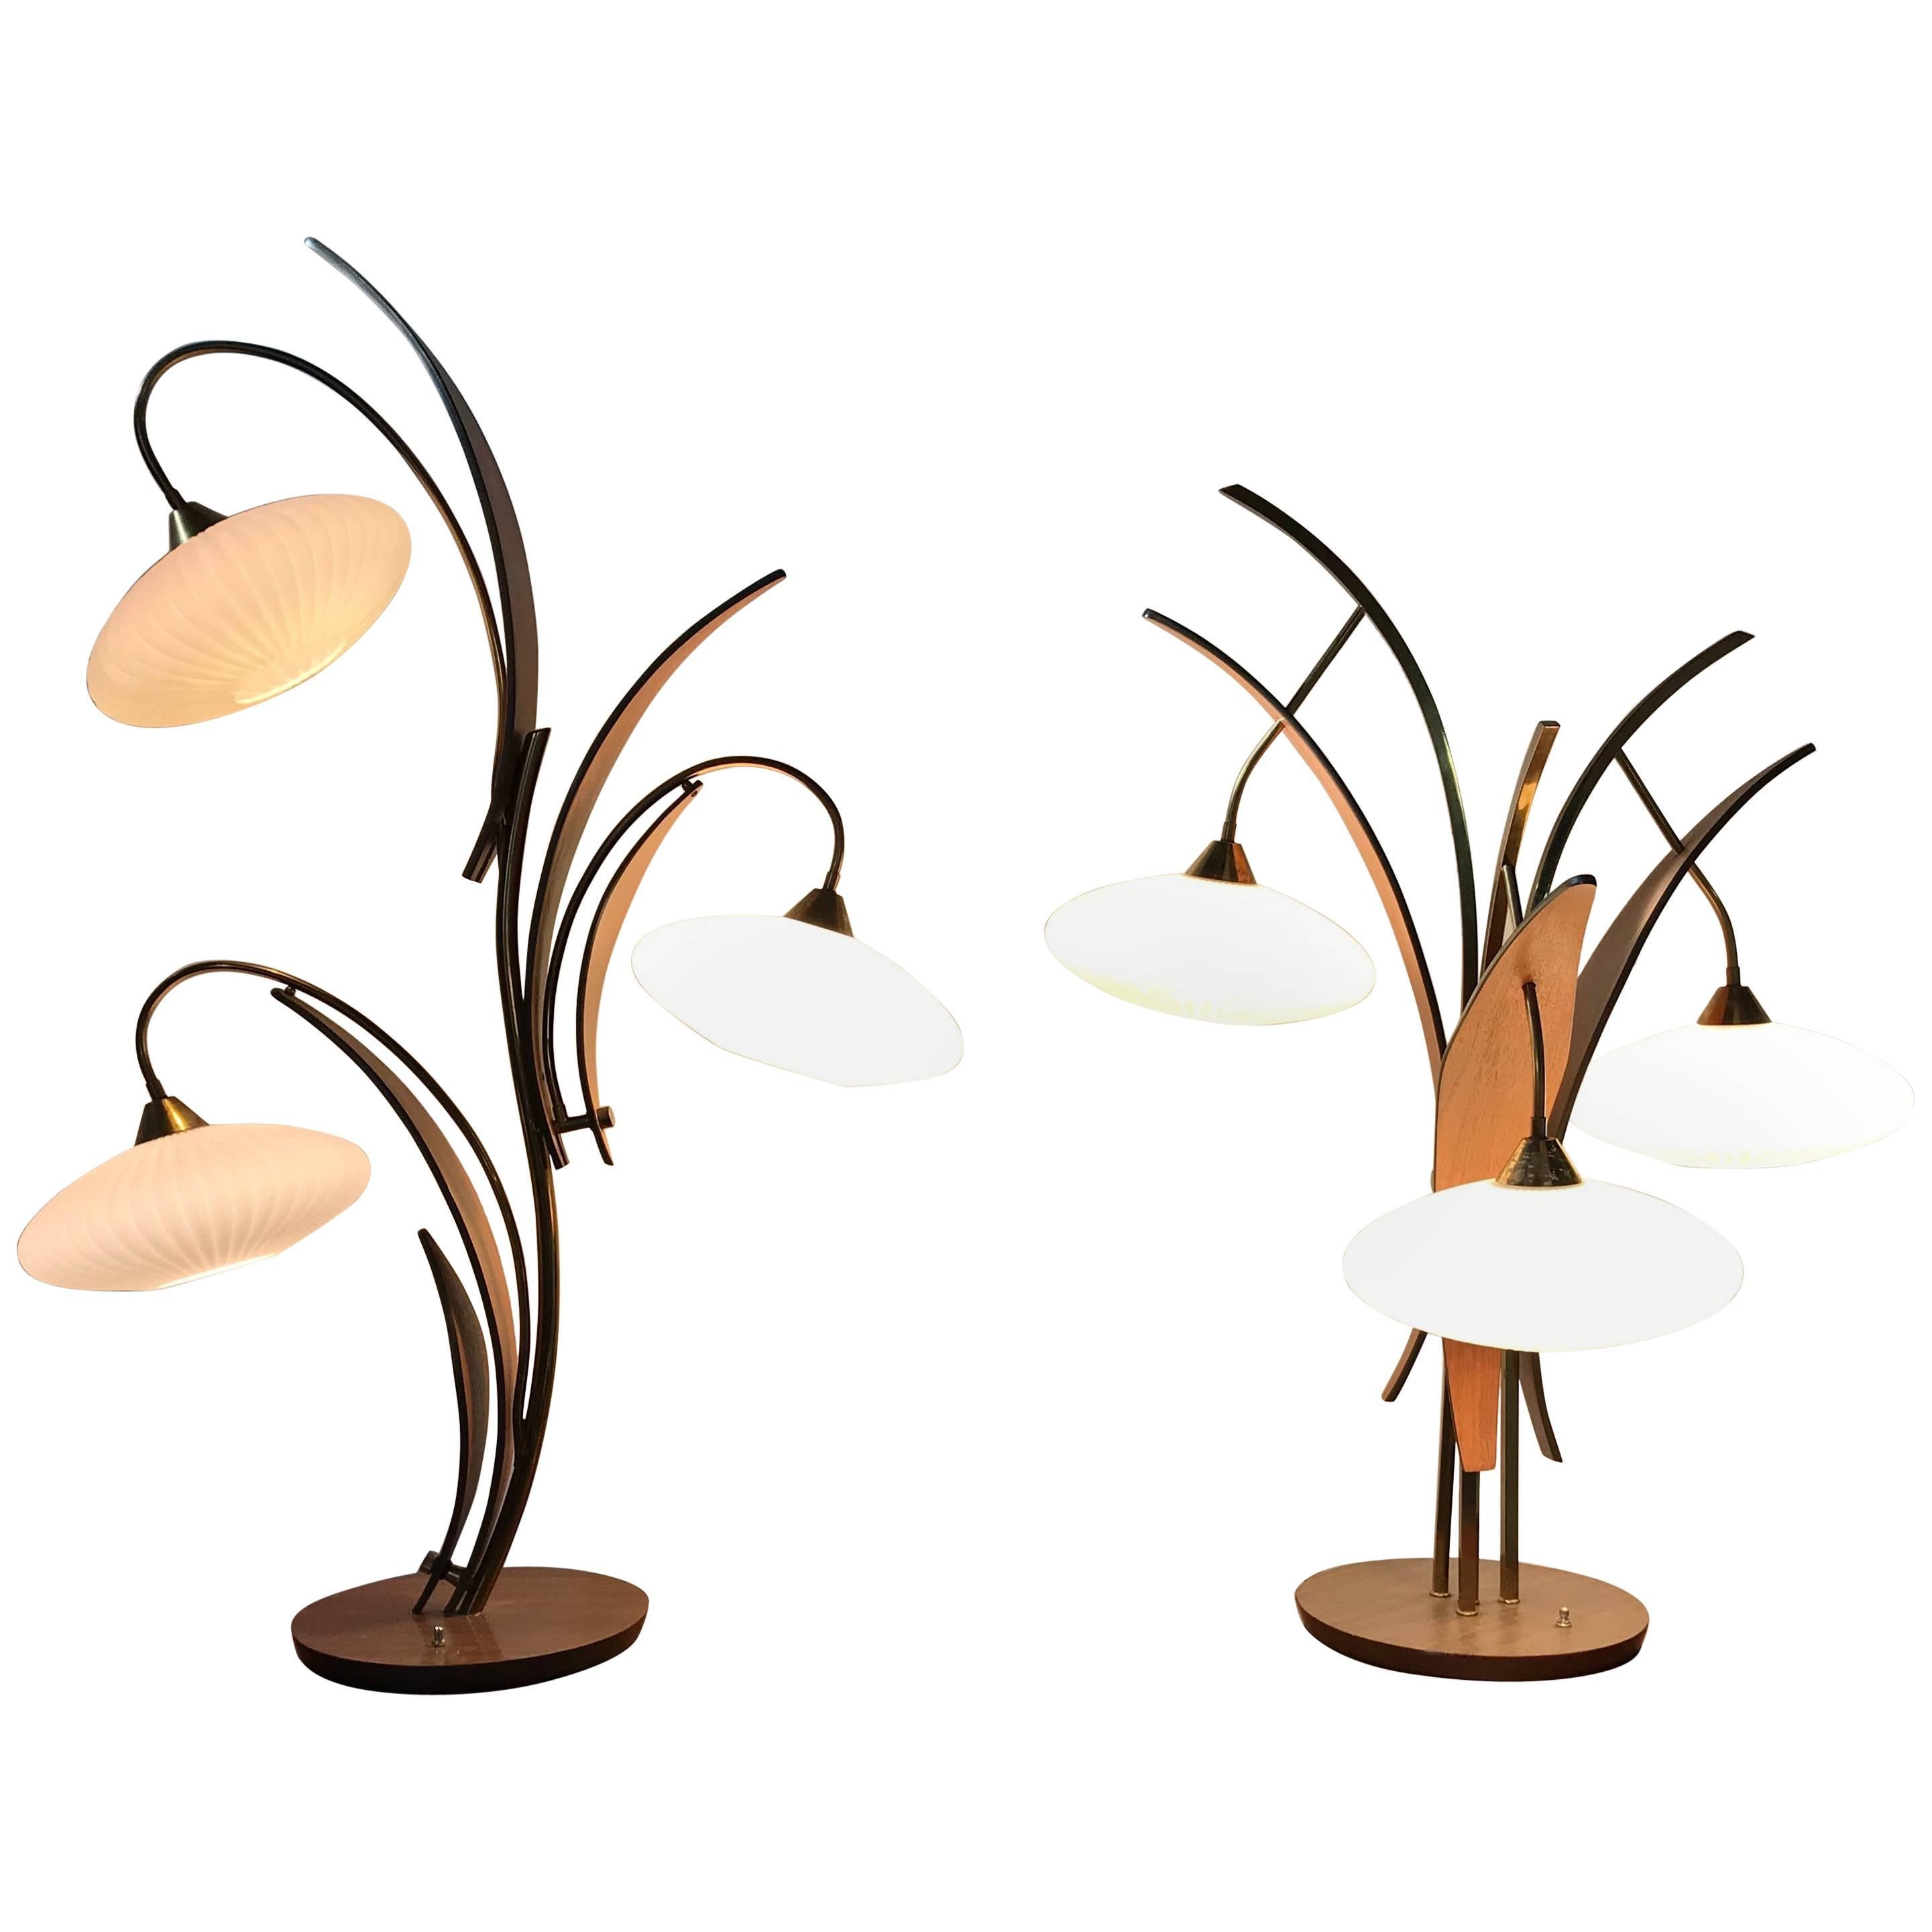 Pair of Classic Mid-Century Modern "Flower" Wood and Glass Lamps